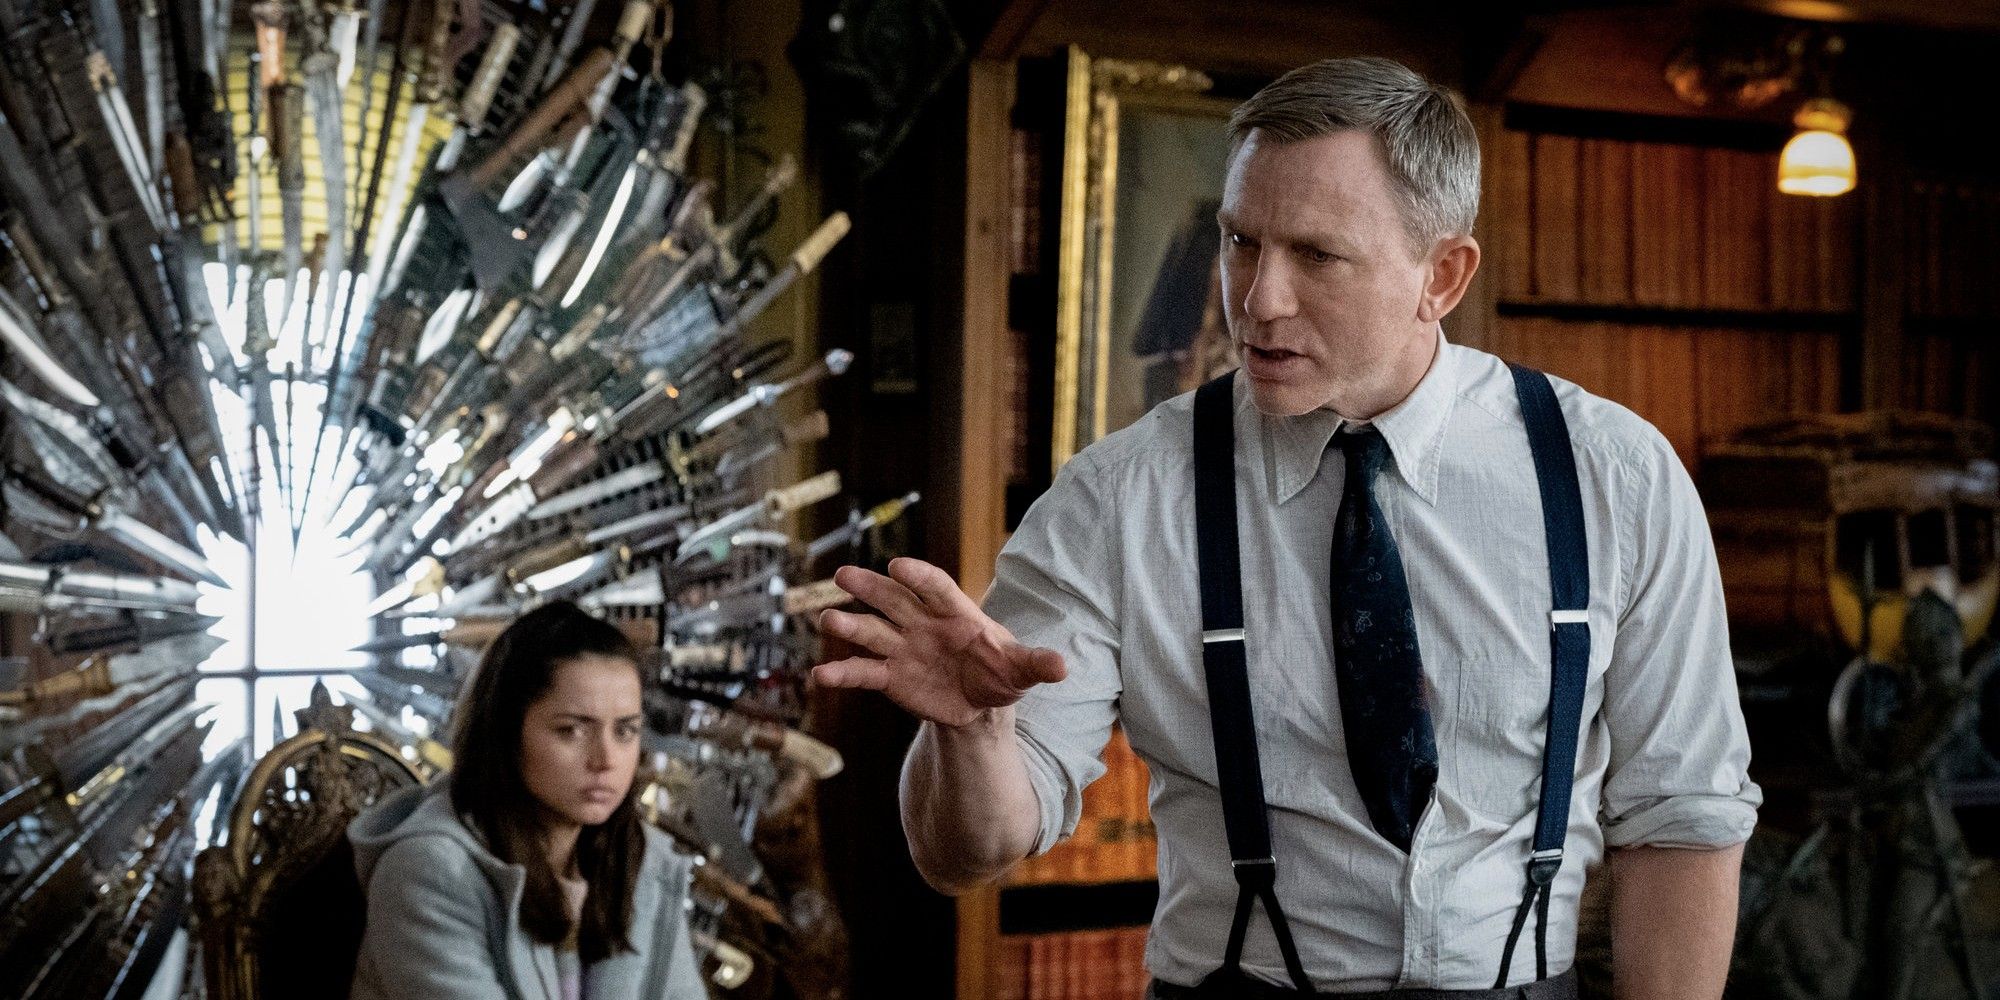 Daniel Craig talking with his hands while Ana de Armas looks at him in the background in 'Knives Out.'